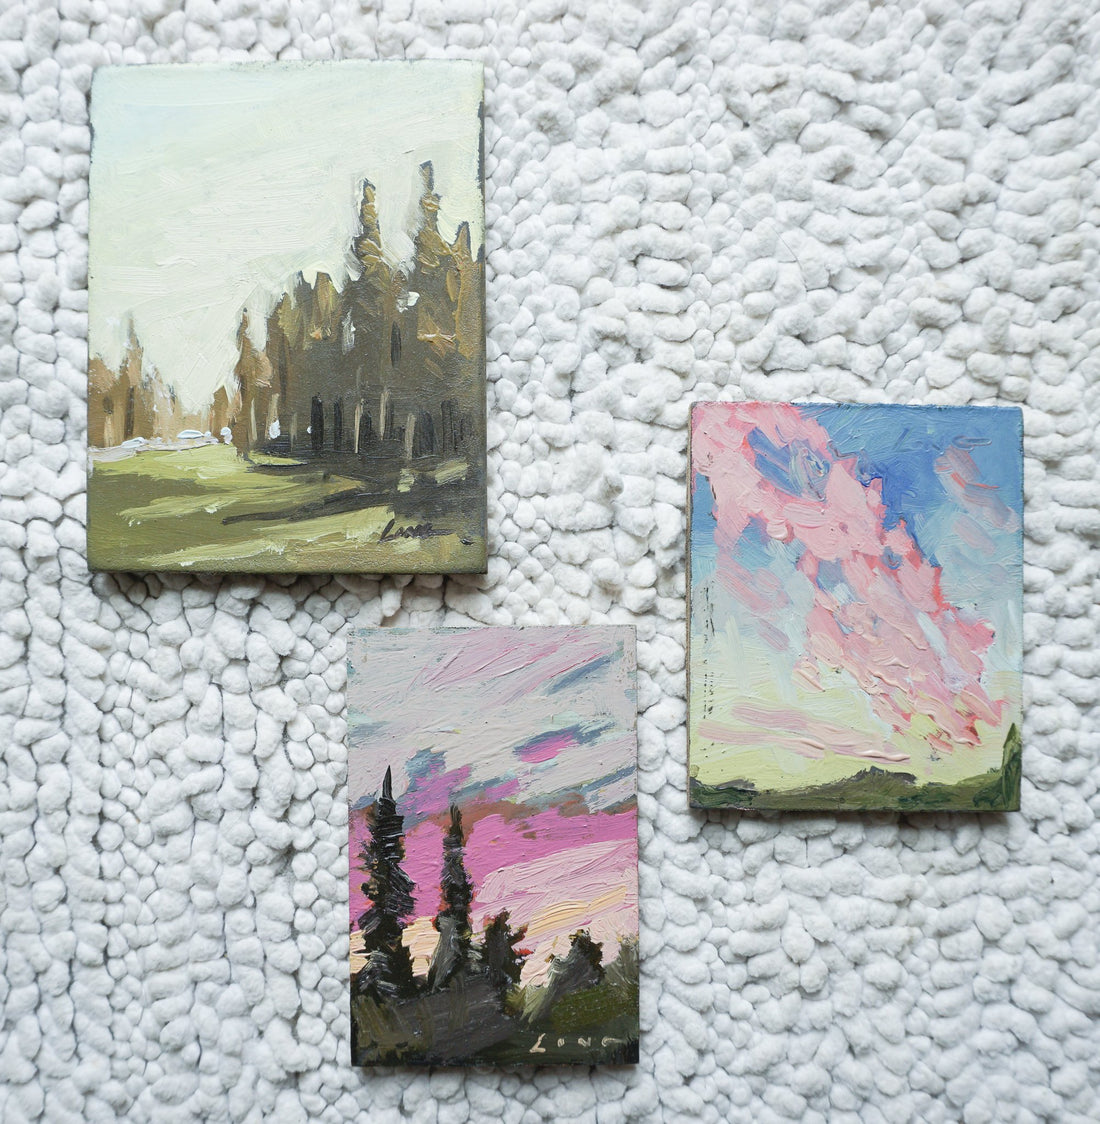 Original Pacific Northwest Landscape Paintings on Mixed Media - Signed by PNW Artist Long